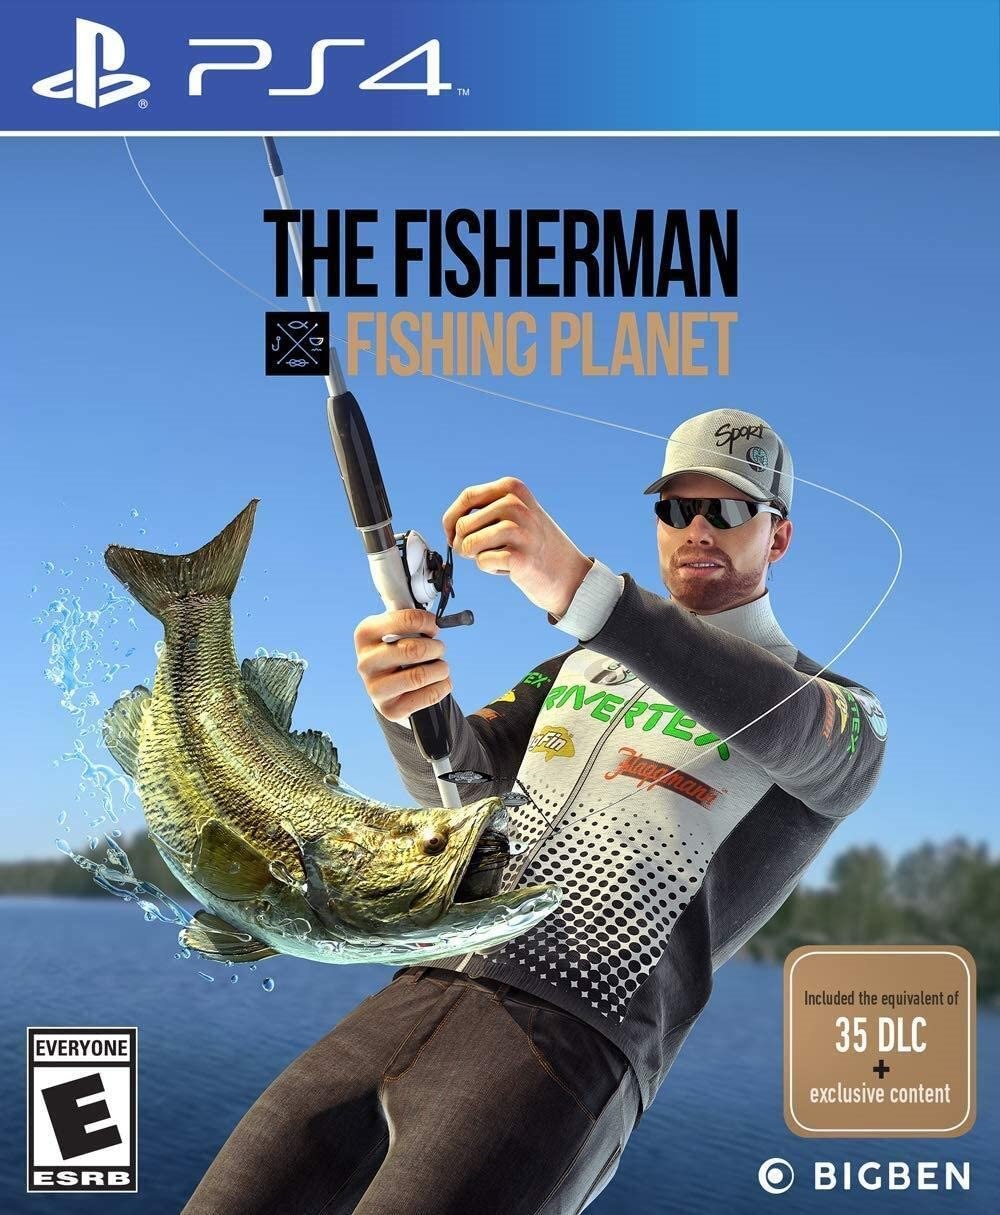 The 5 Best Hunting & Fishing Video Games to Cure Buck (or Bass